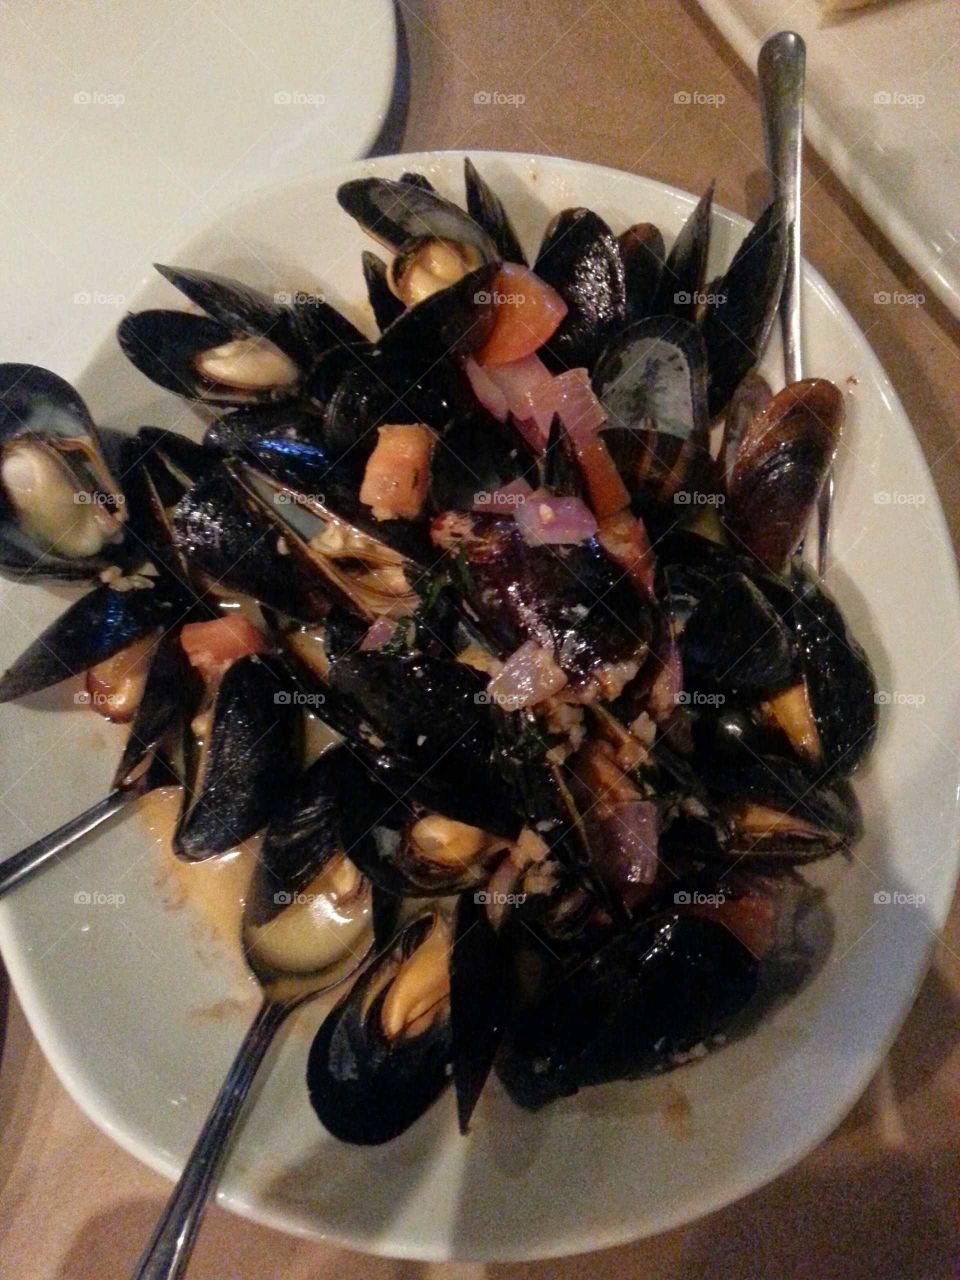 Mussels anyone